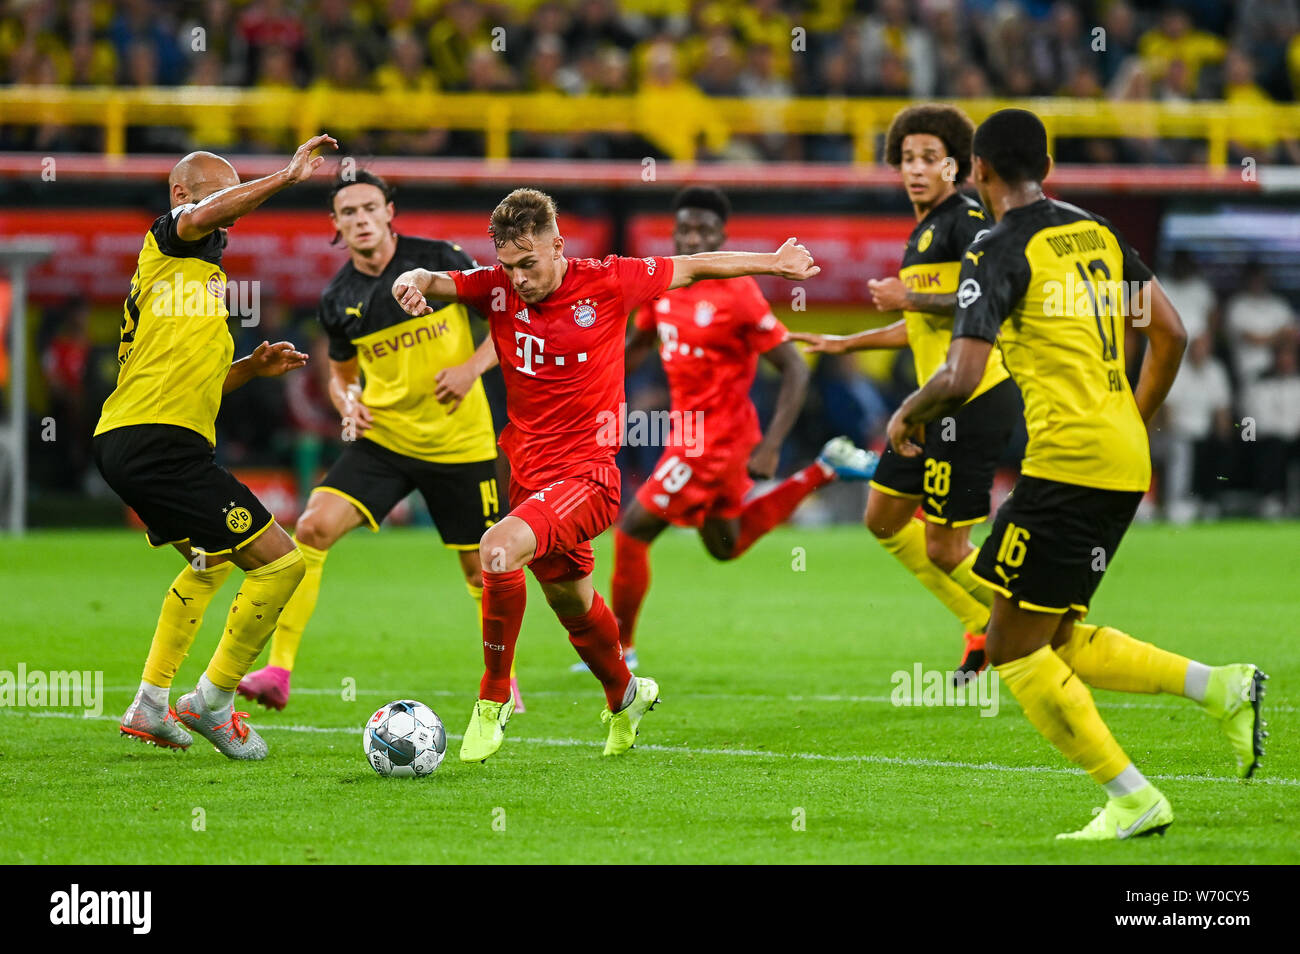 Joshua Kimmich from Bayern Munich seen in action during the Germany Supercup Final 2019 match between Borussia Dortmund and Bayern Munich.(Final score: Borussia Dortmund 2:0 Bayern Munich) Stock Photo